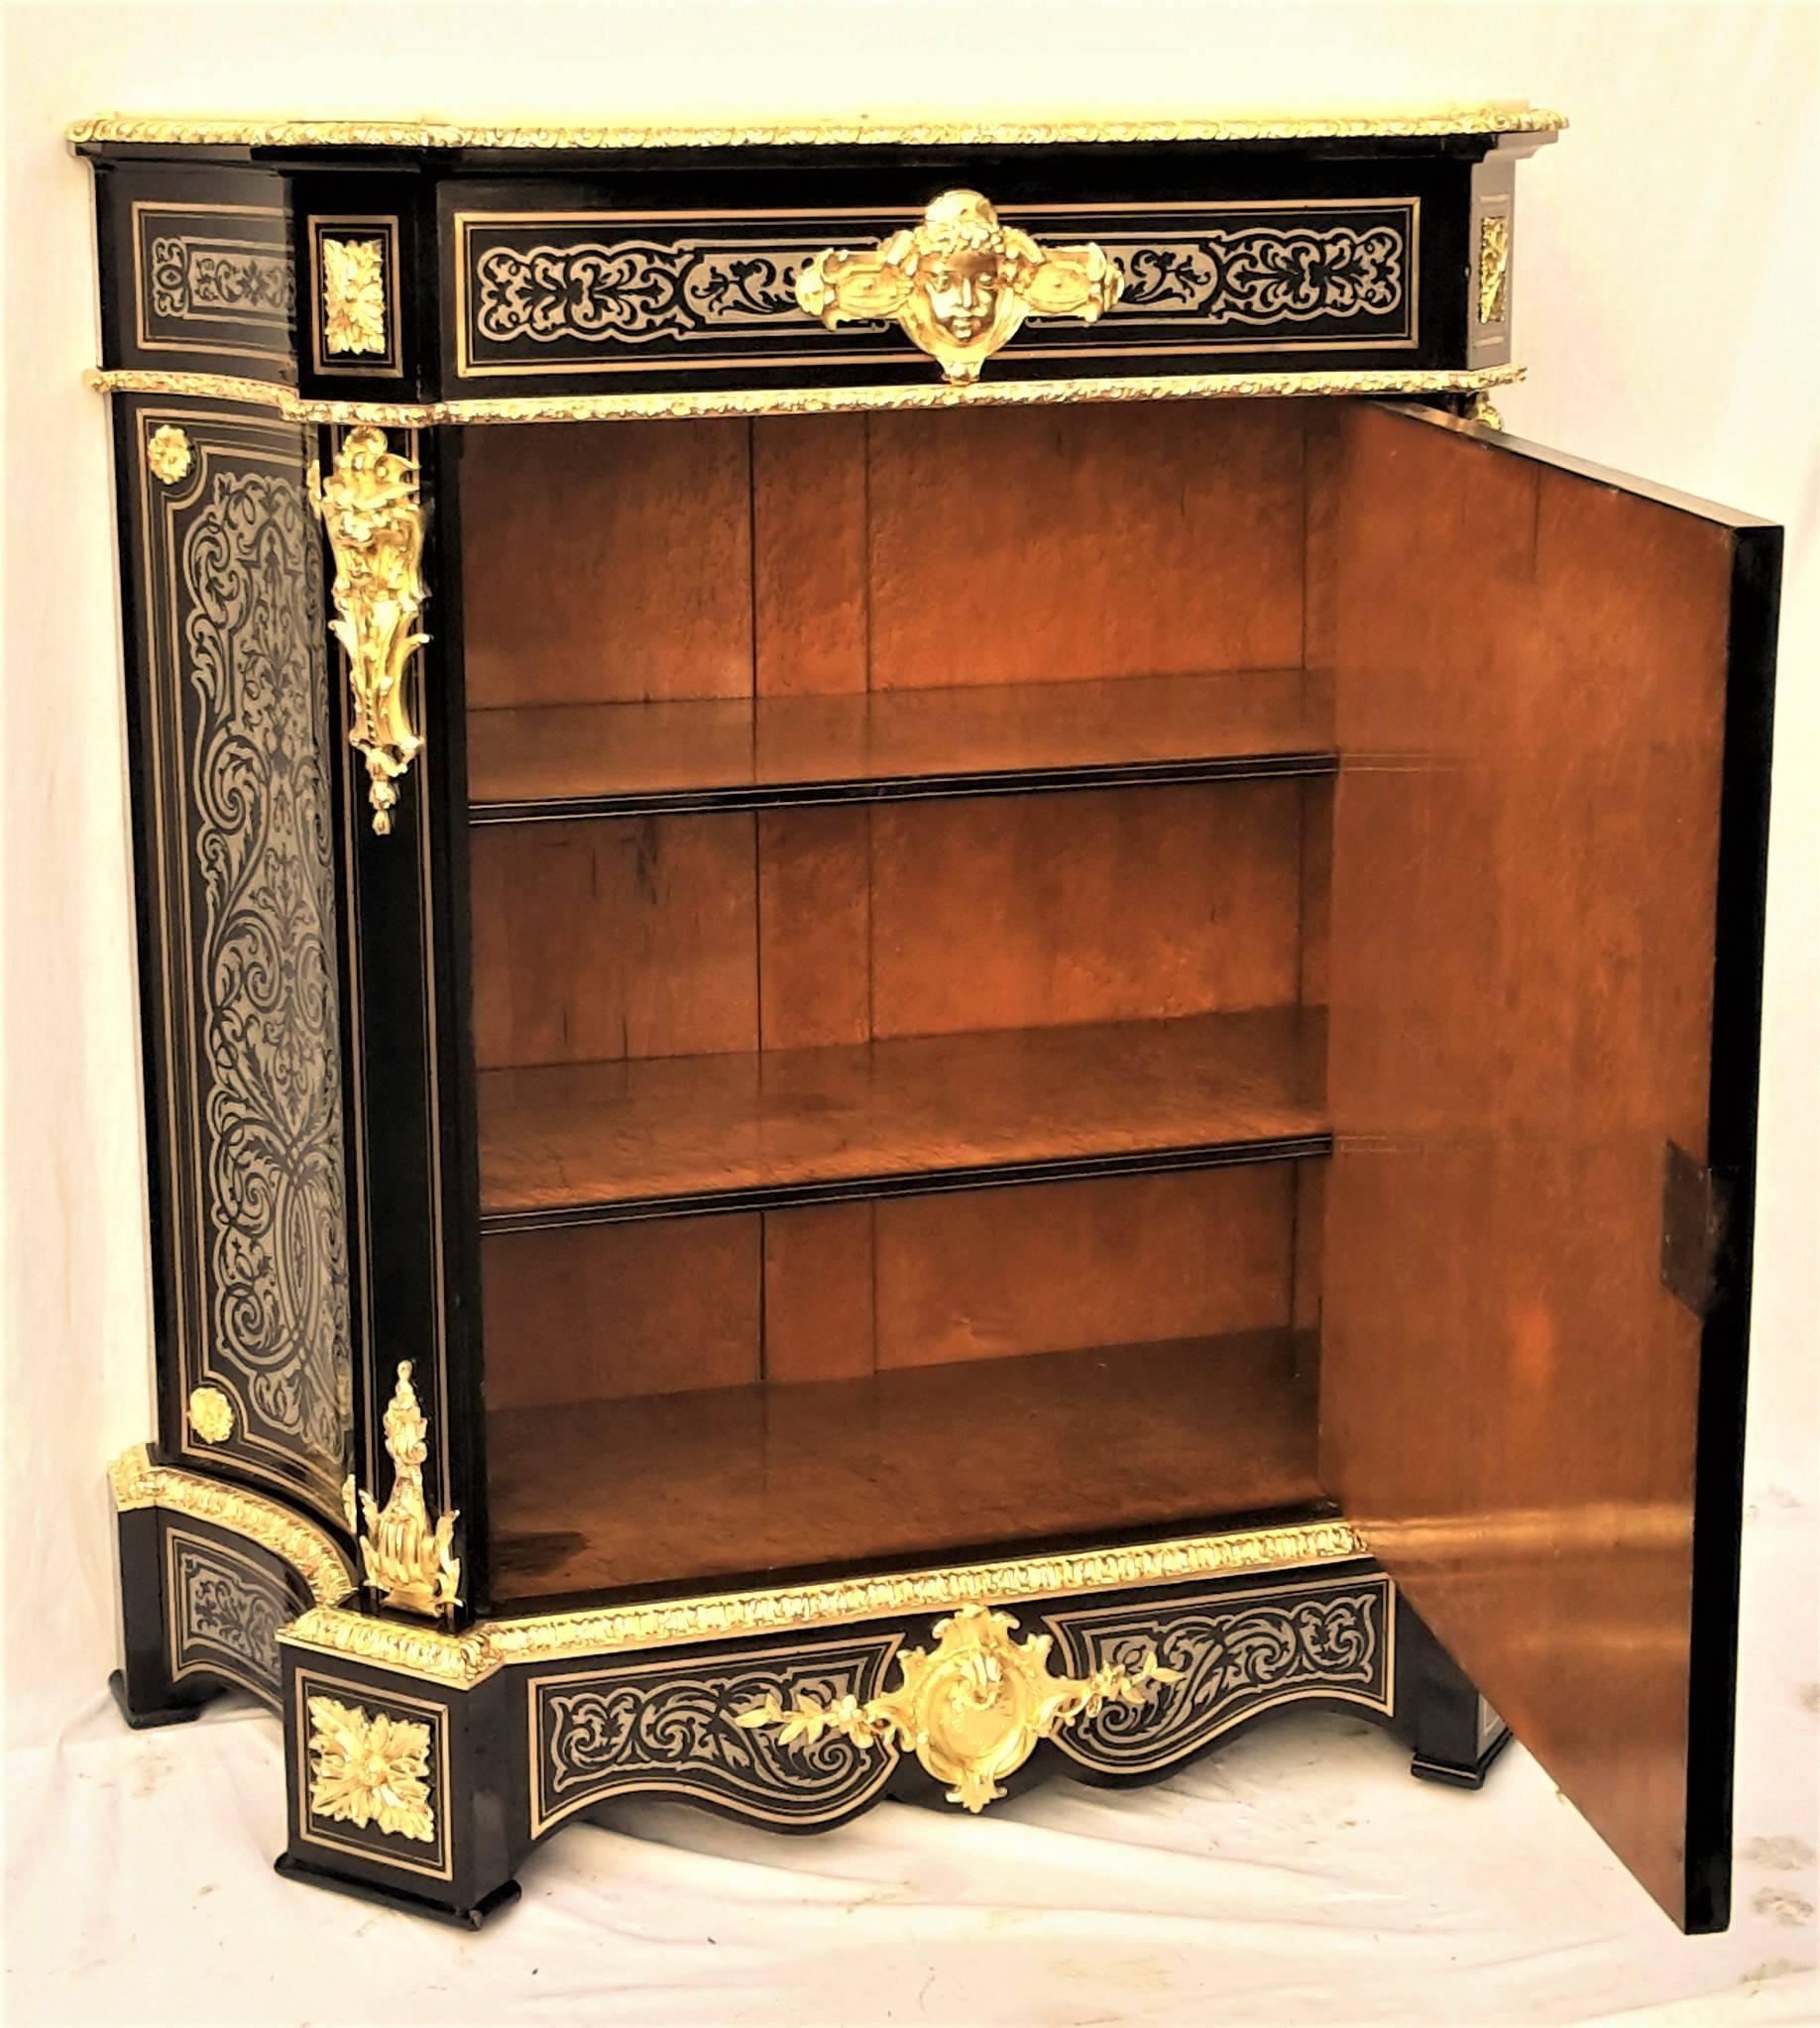 Large magnificent French cabinet, unique, rare tin marquetry in Boulle style at every facade and even at the base. Gorgeous and elegant ornaments in gilt bronze and inlaid Carrara marble in a good condition. The central motif of the door medallion